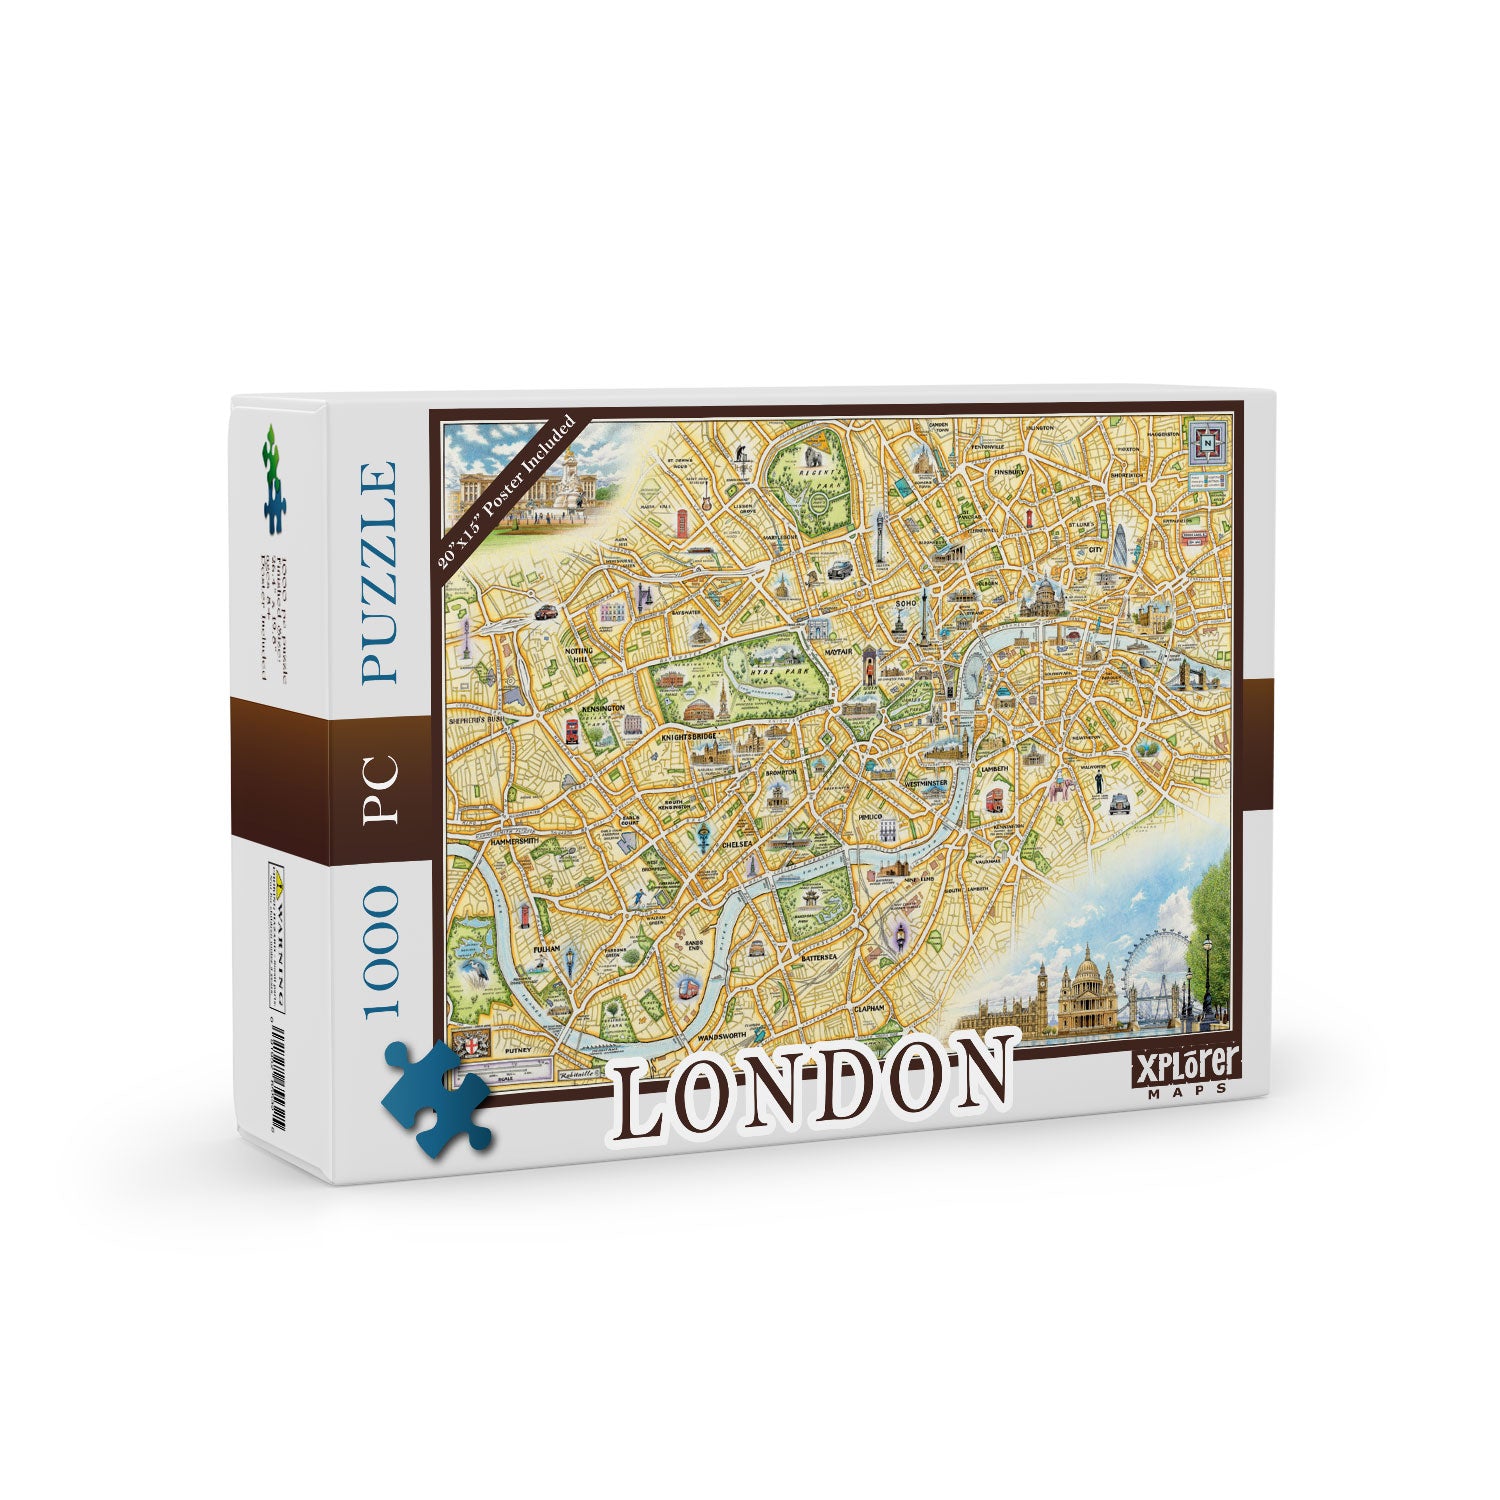 London Map Jigsaw Puzzles by Xplorer Maps. The map features the intricate city layout of London, England. Featured illustrations include a double-decker red bus, Kensington, Buckingham Palace, and Regent's Park.